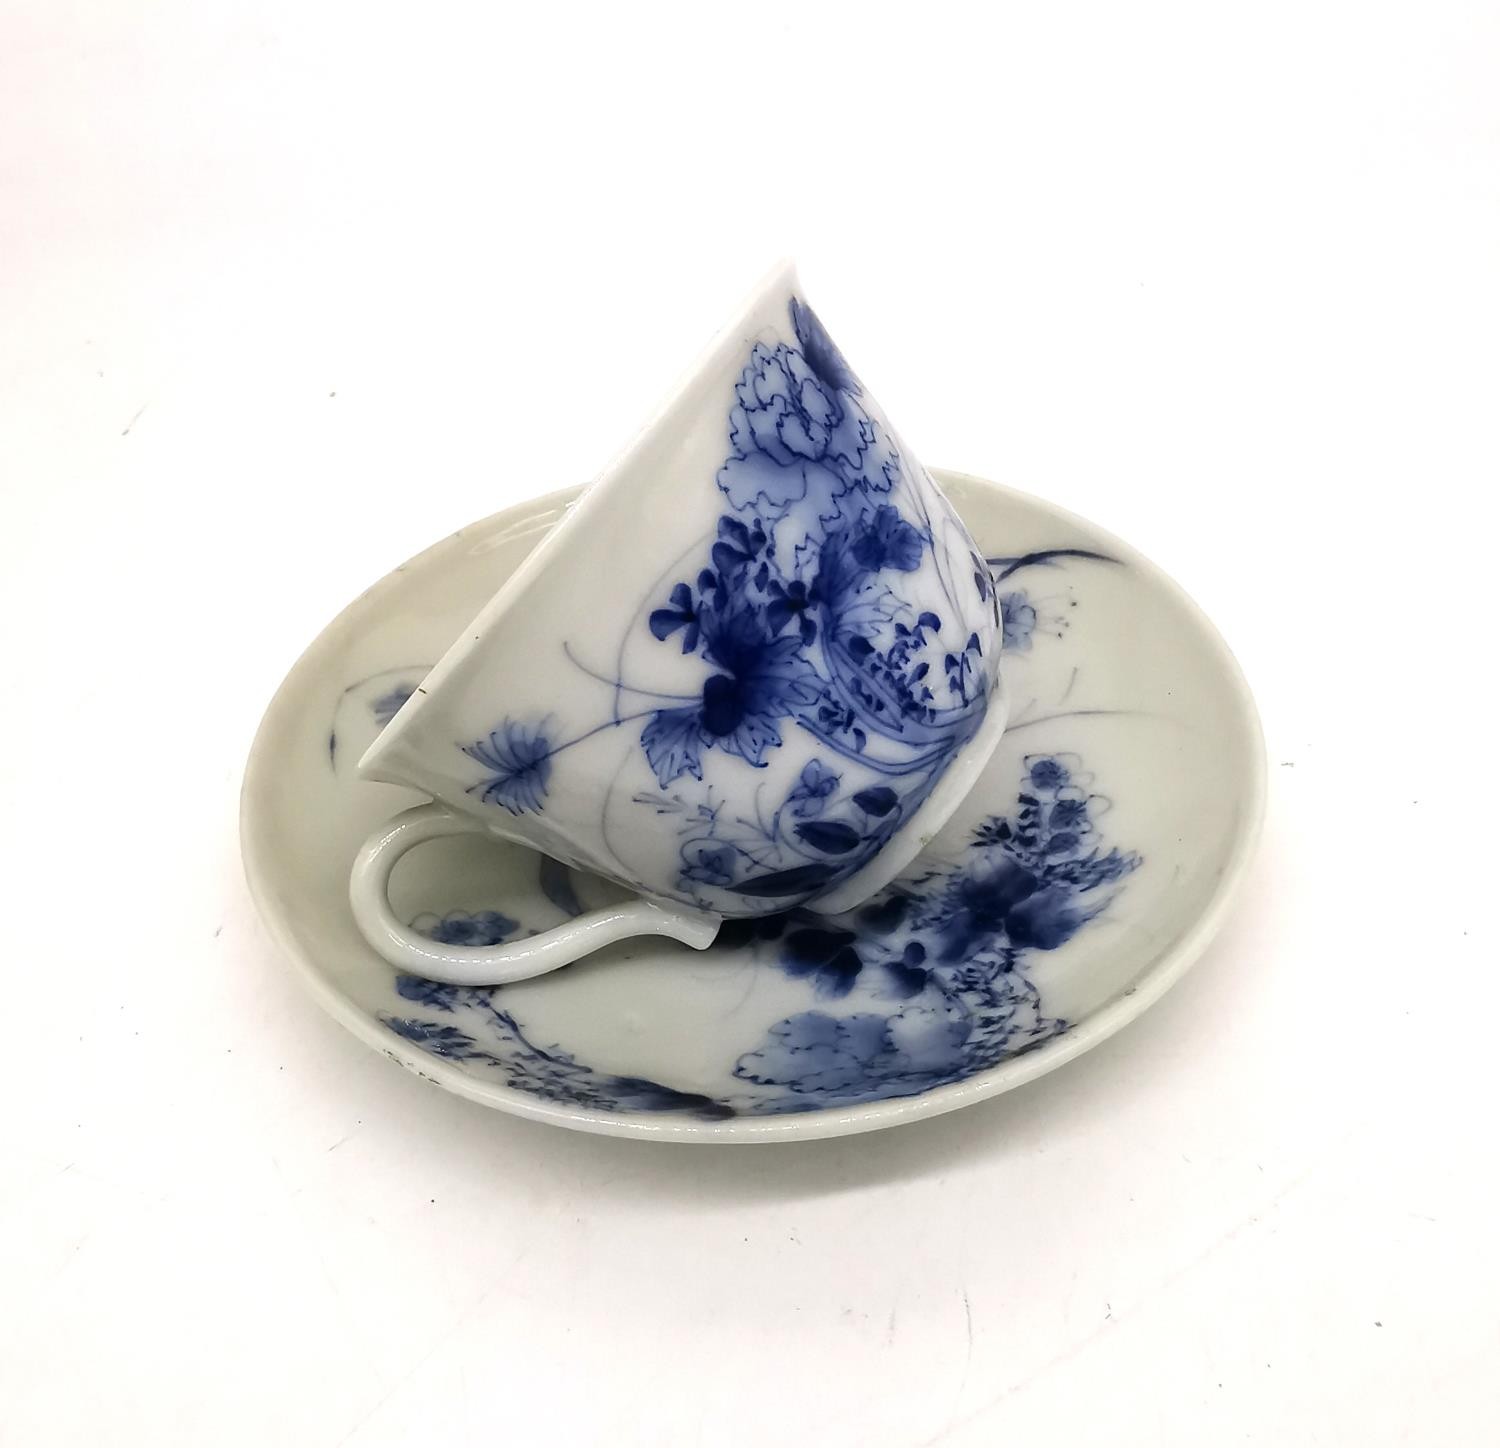 A Japanese 19th century hand painted porcelain small blue and white floral and foliate design teacup - Image 8 of 9